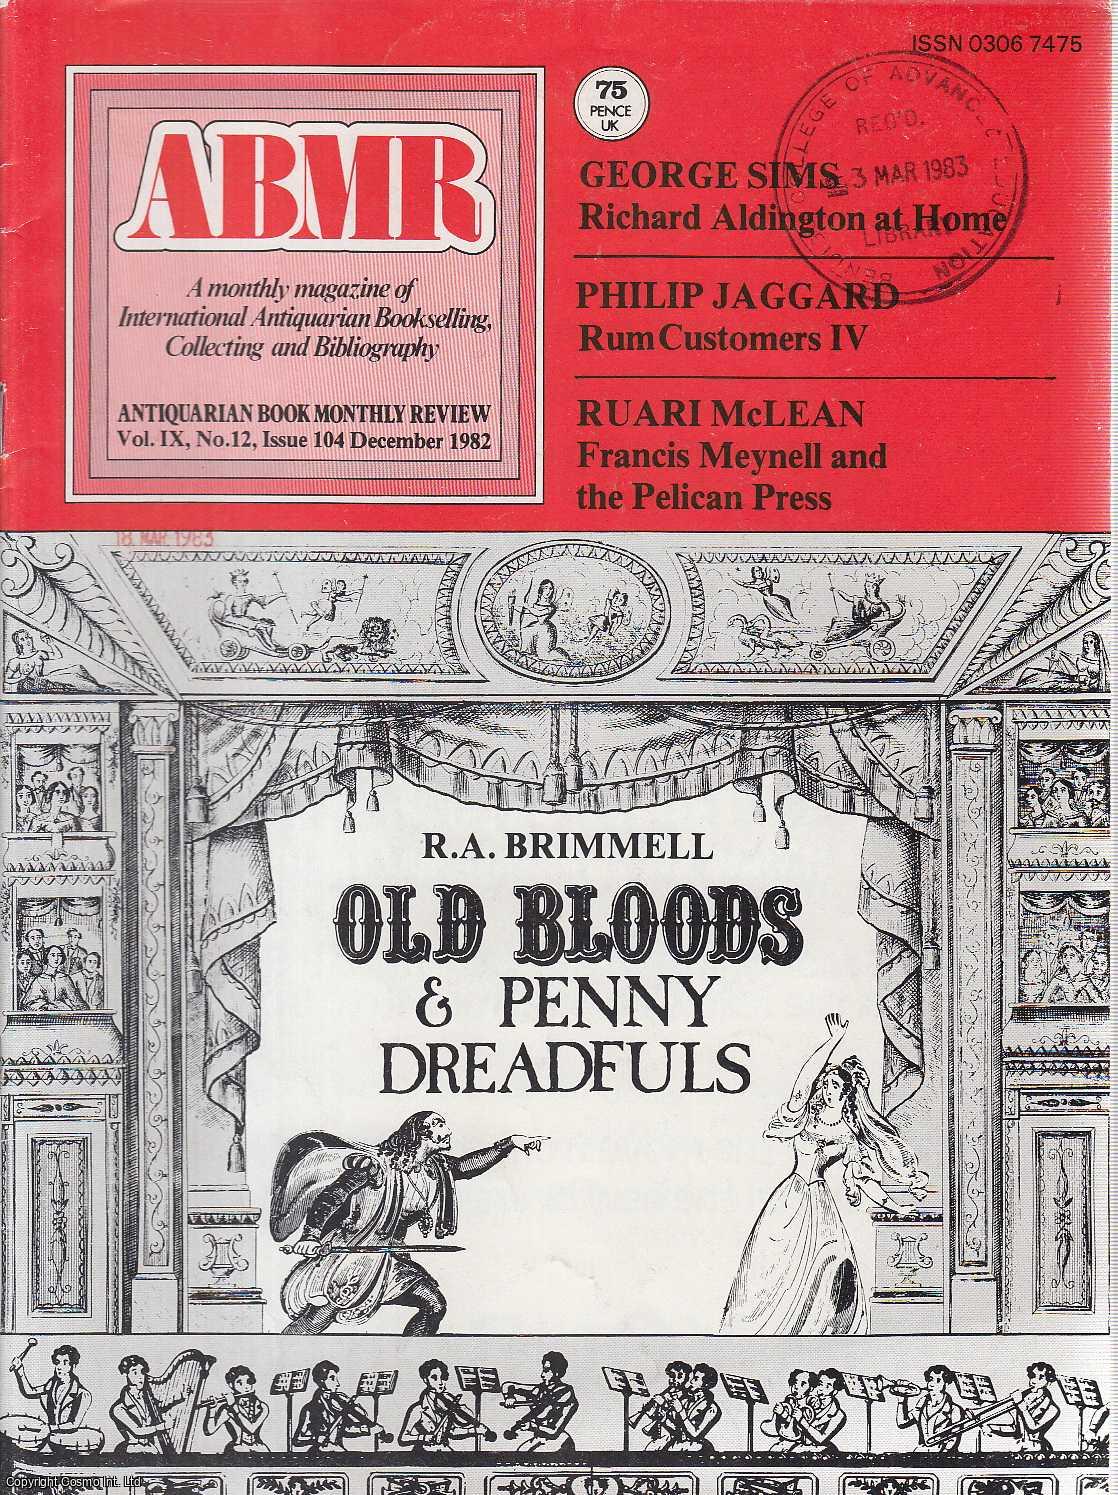 R.A. Brimmell - Old Bloods and Penny Dreadfuls, Part 1. With a short bibliography. An original article contained in a complete monthly issue of the Antiquarian Book Monthly Review, 1982.